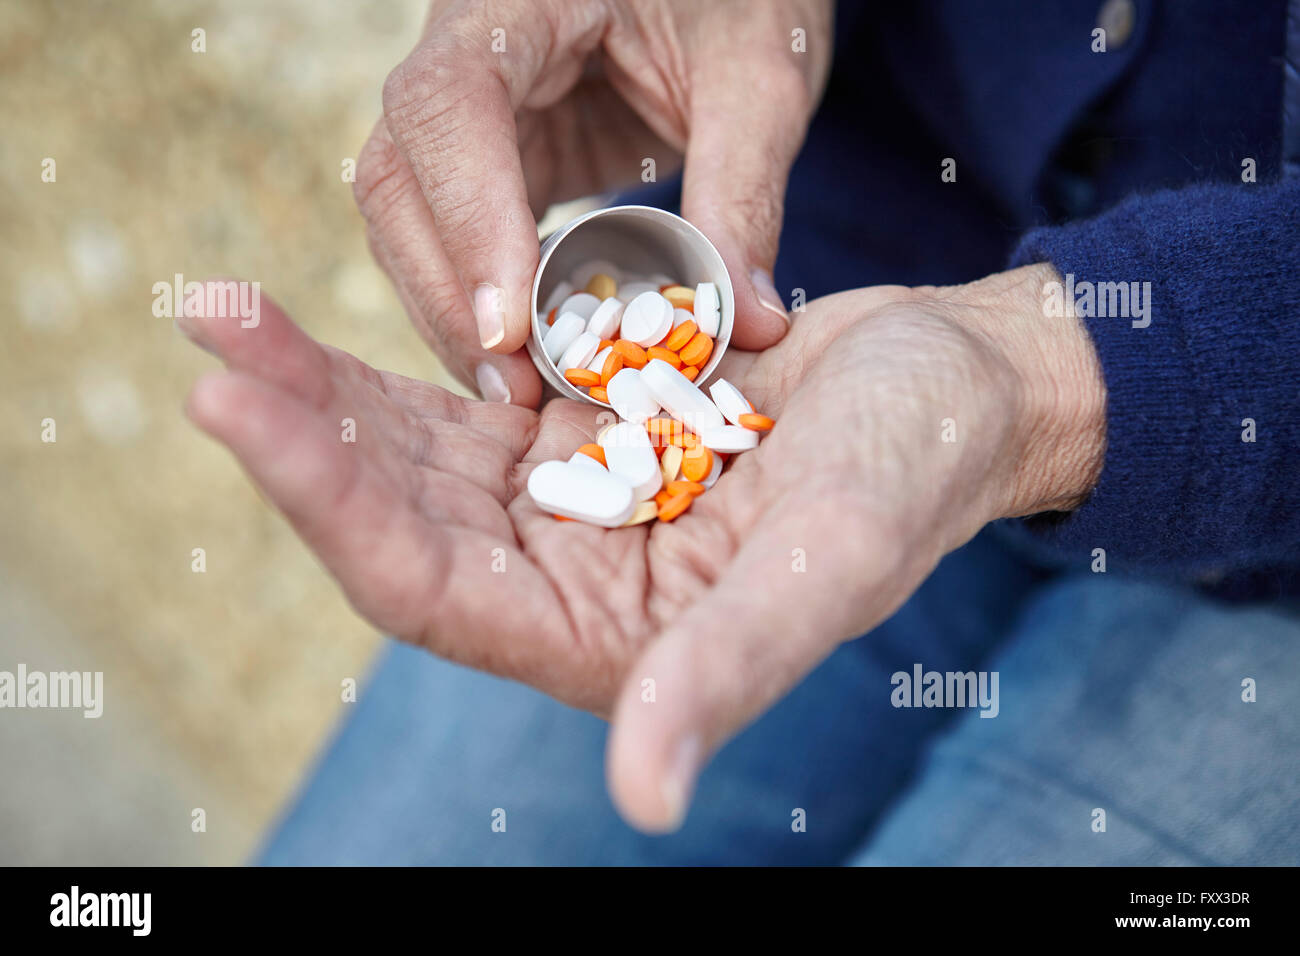 Woman dispensing pills from pill bottle into hand Stock Photo